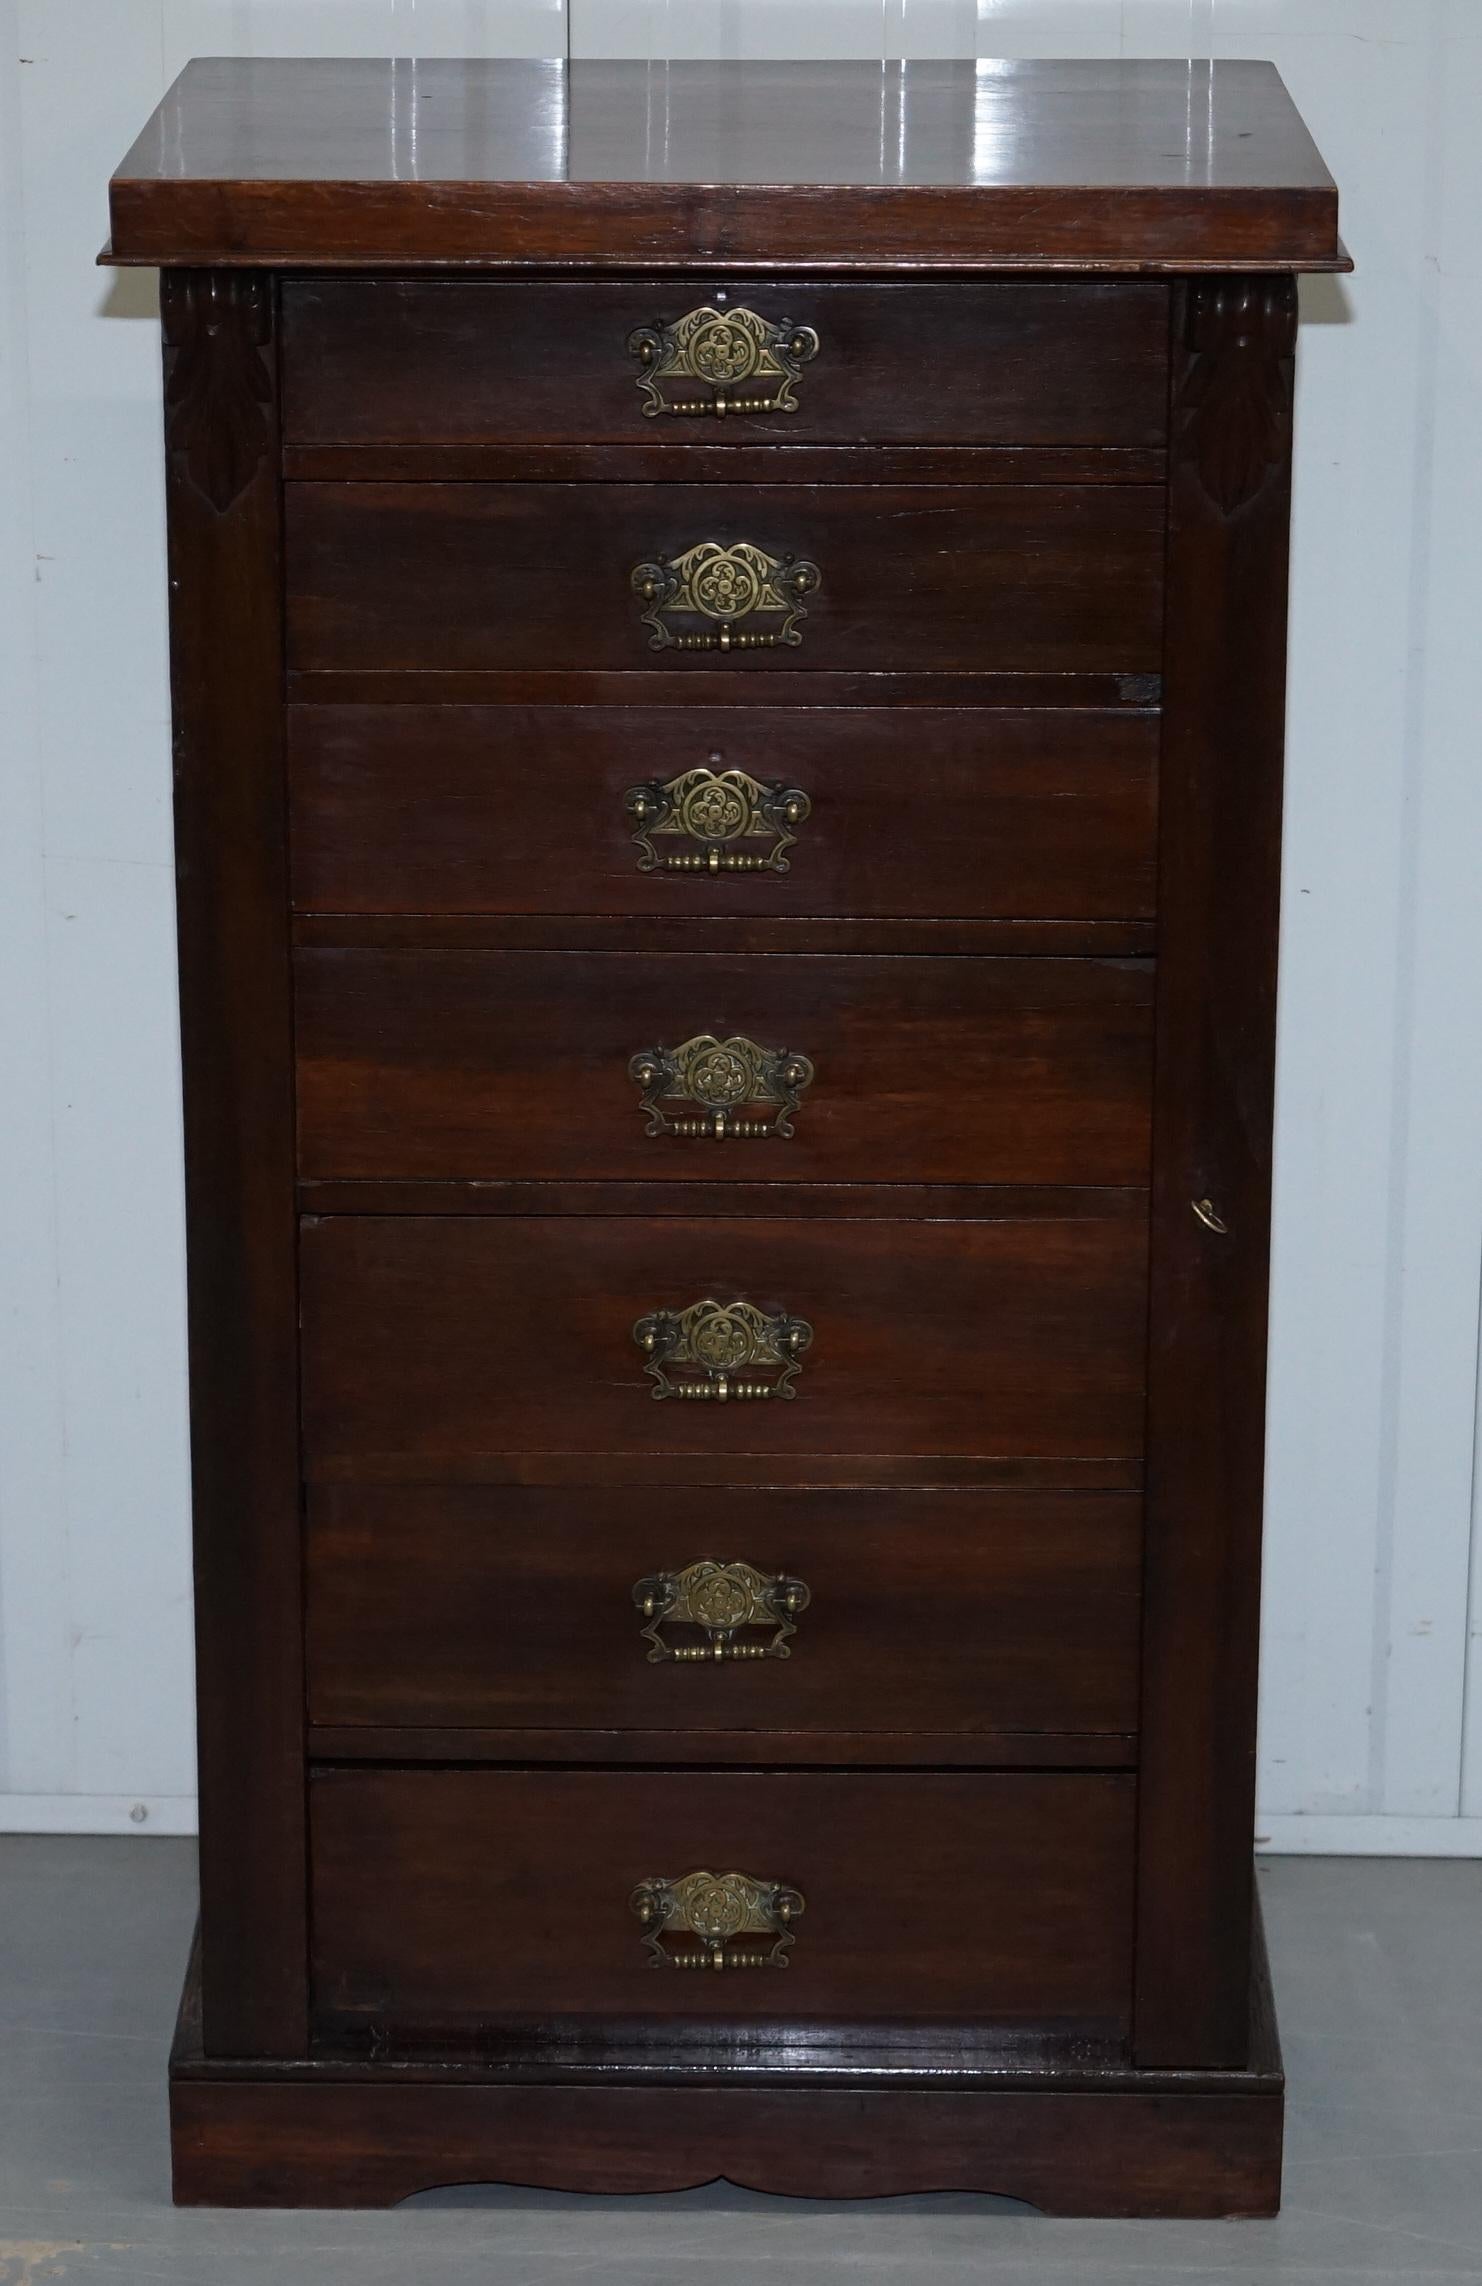 We are delighted to offer for sale this original Victorian mahogany Wellington chest of drawers with period key

A good looking and well-made piece in light mahogany, the handles are all original and look like Maple & Co but its not stamped, the